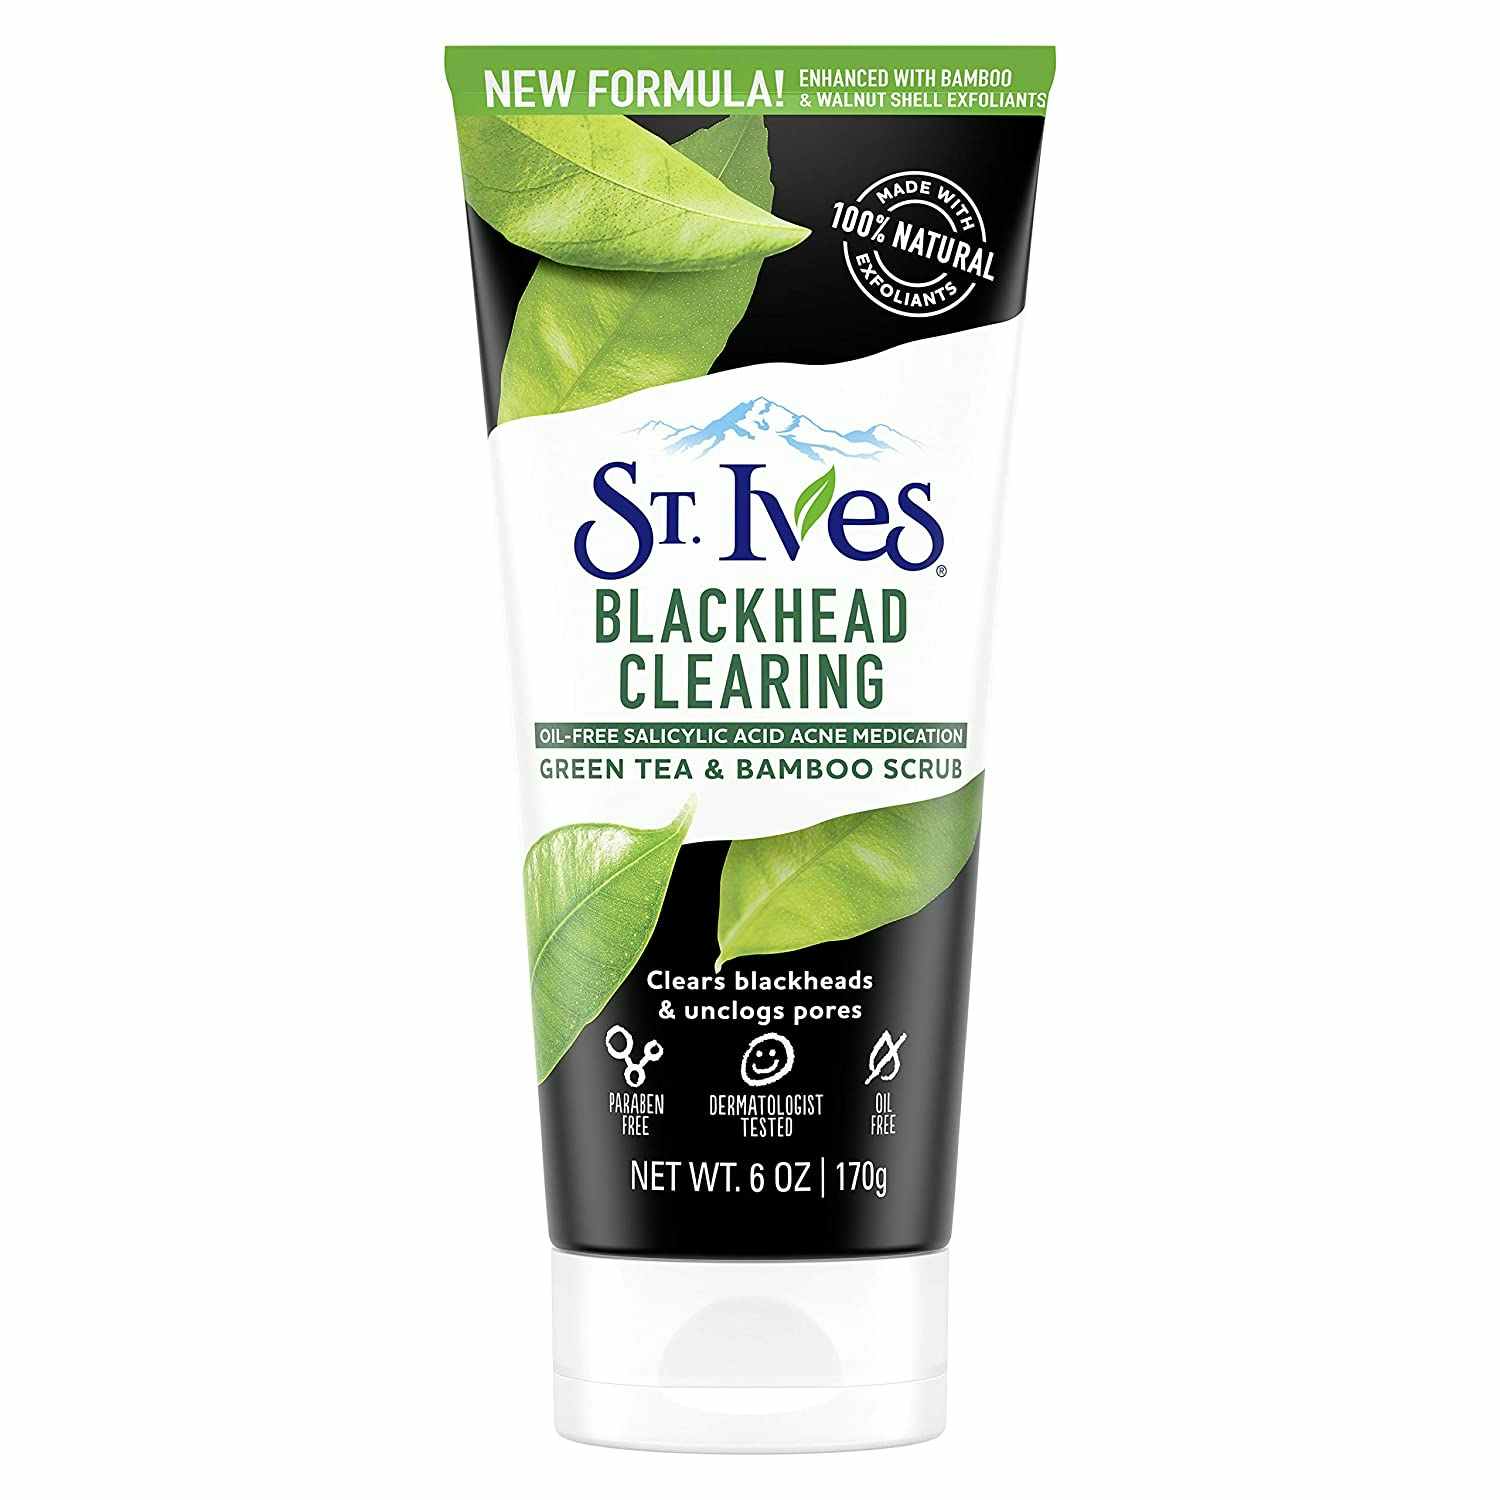 A photo of the green tea St. Ives face scrub